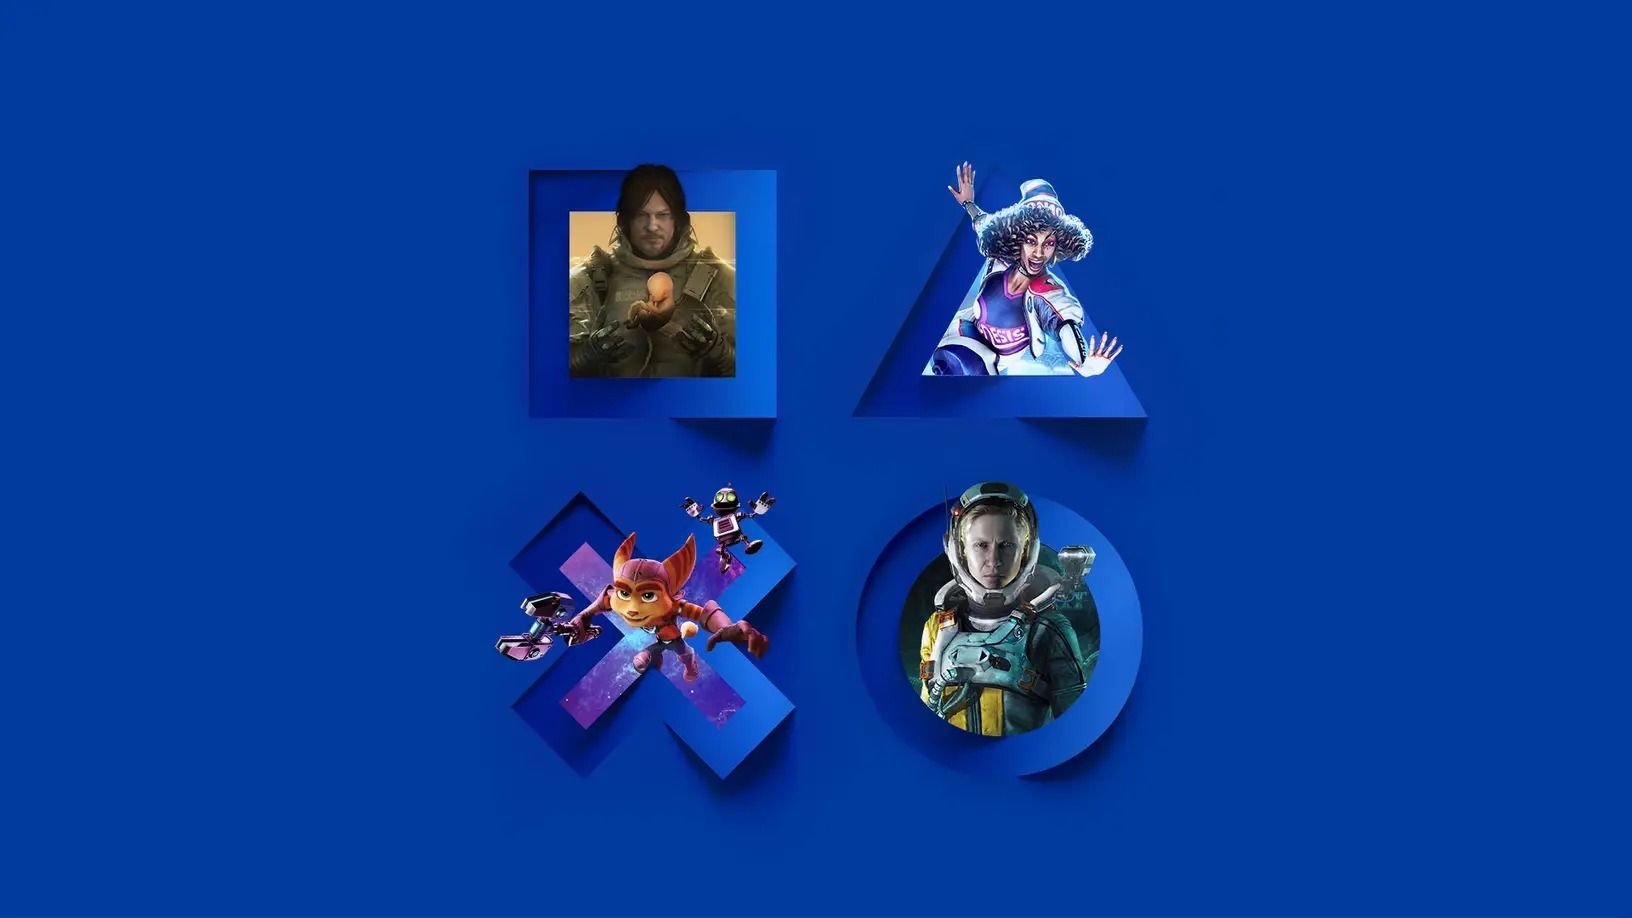 playstation wrap up